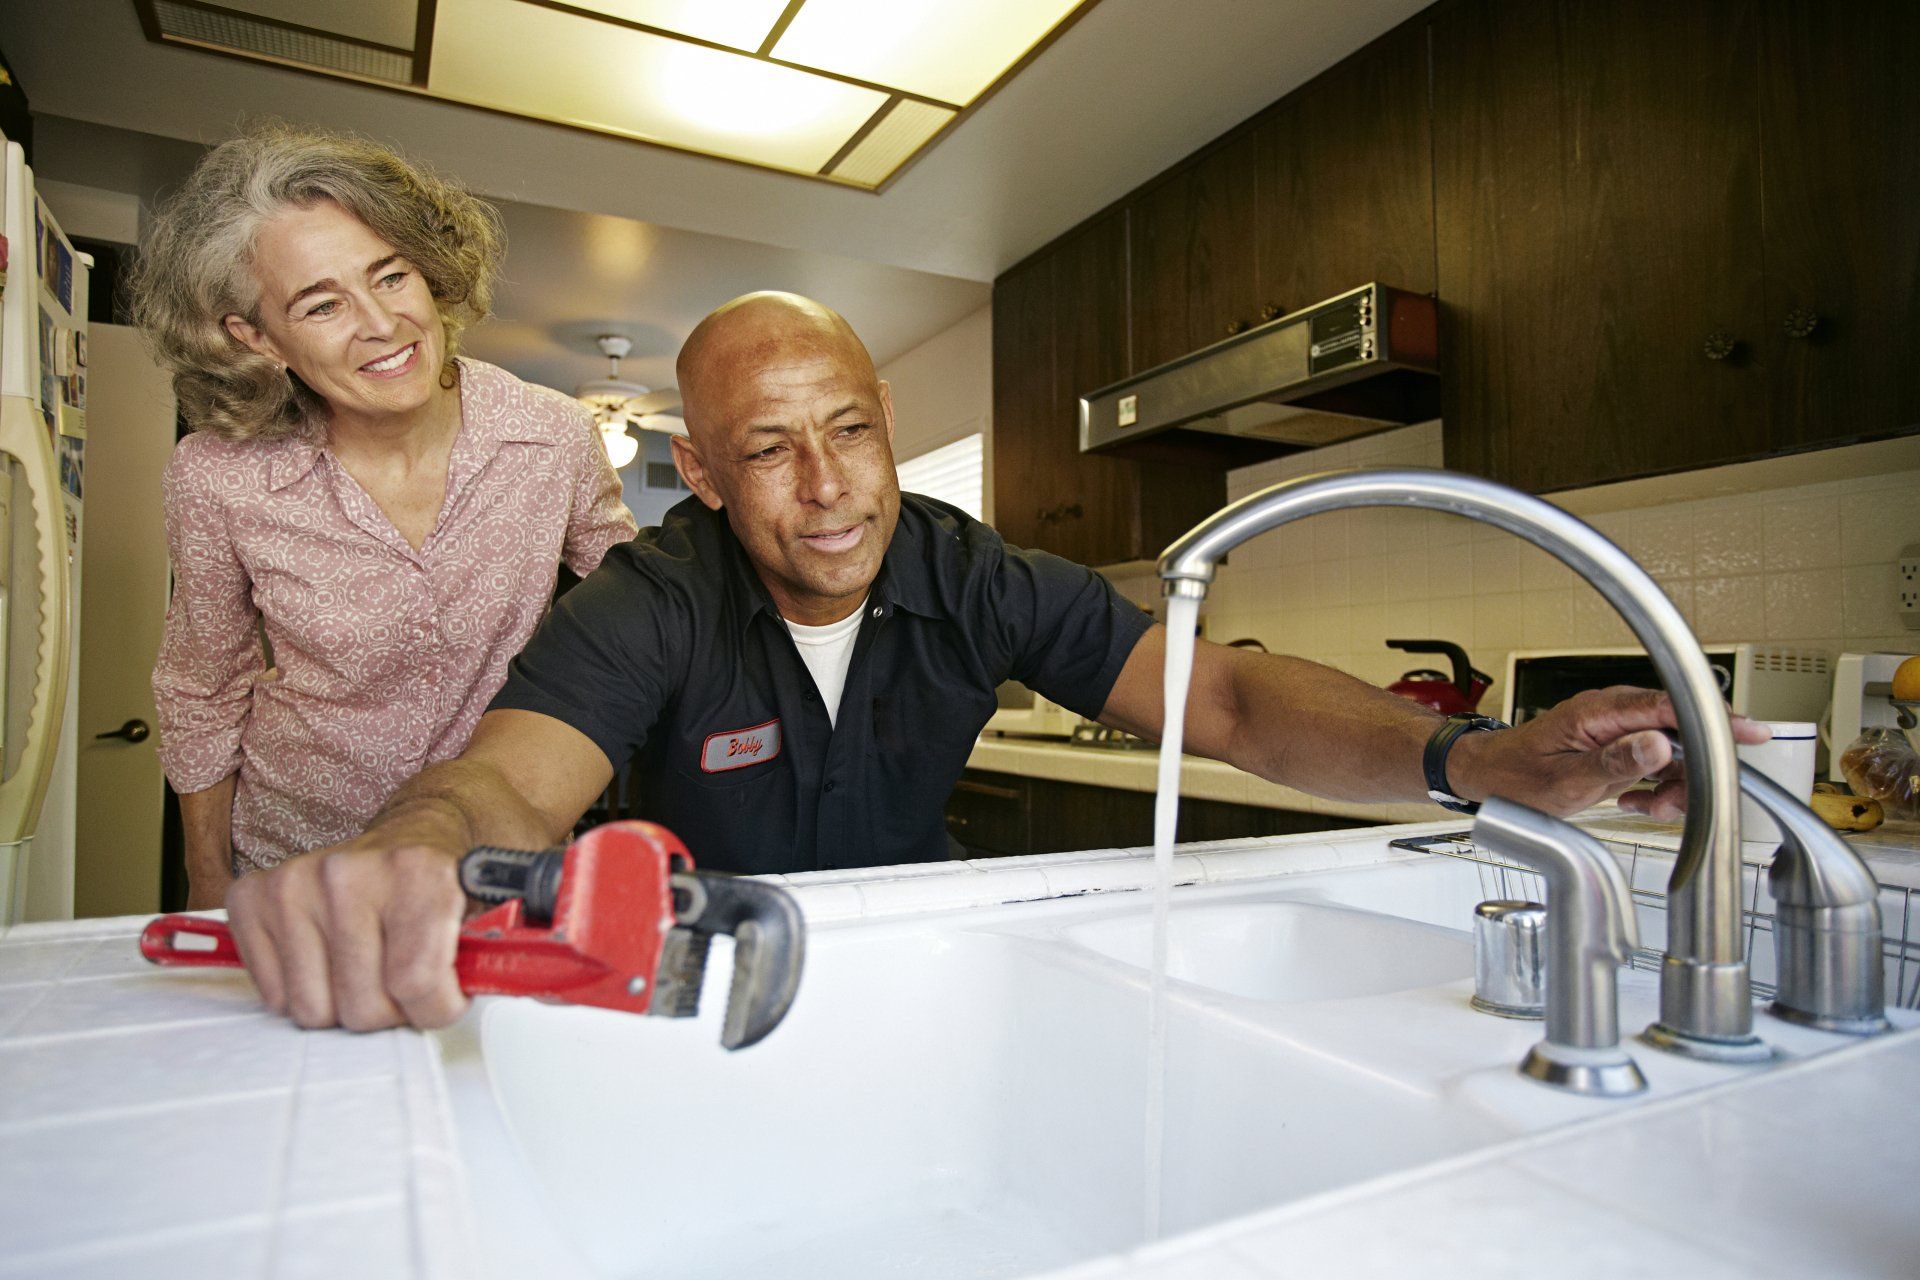 Plumbing services in Waldorf